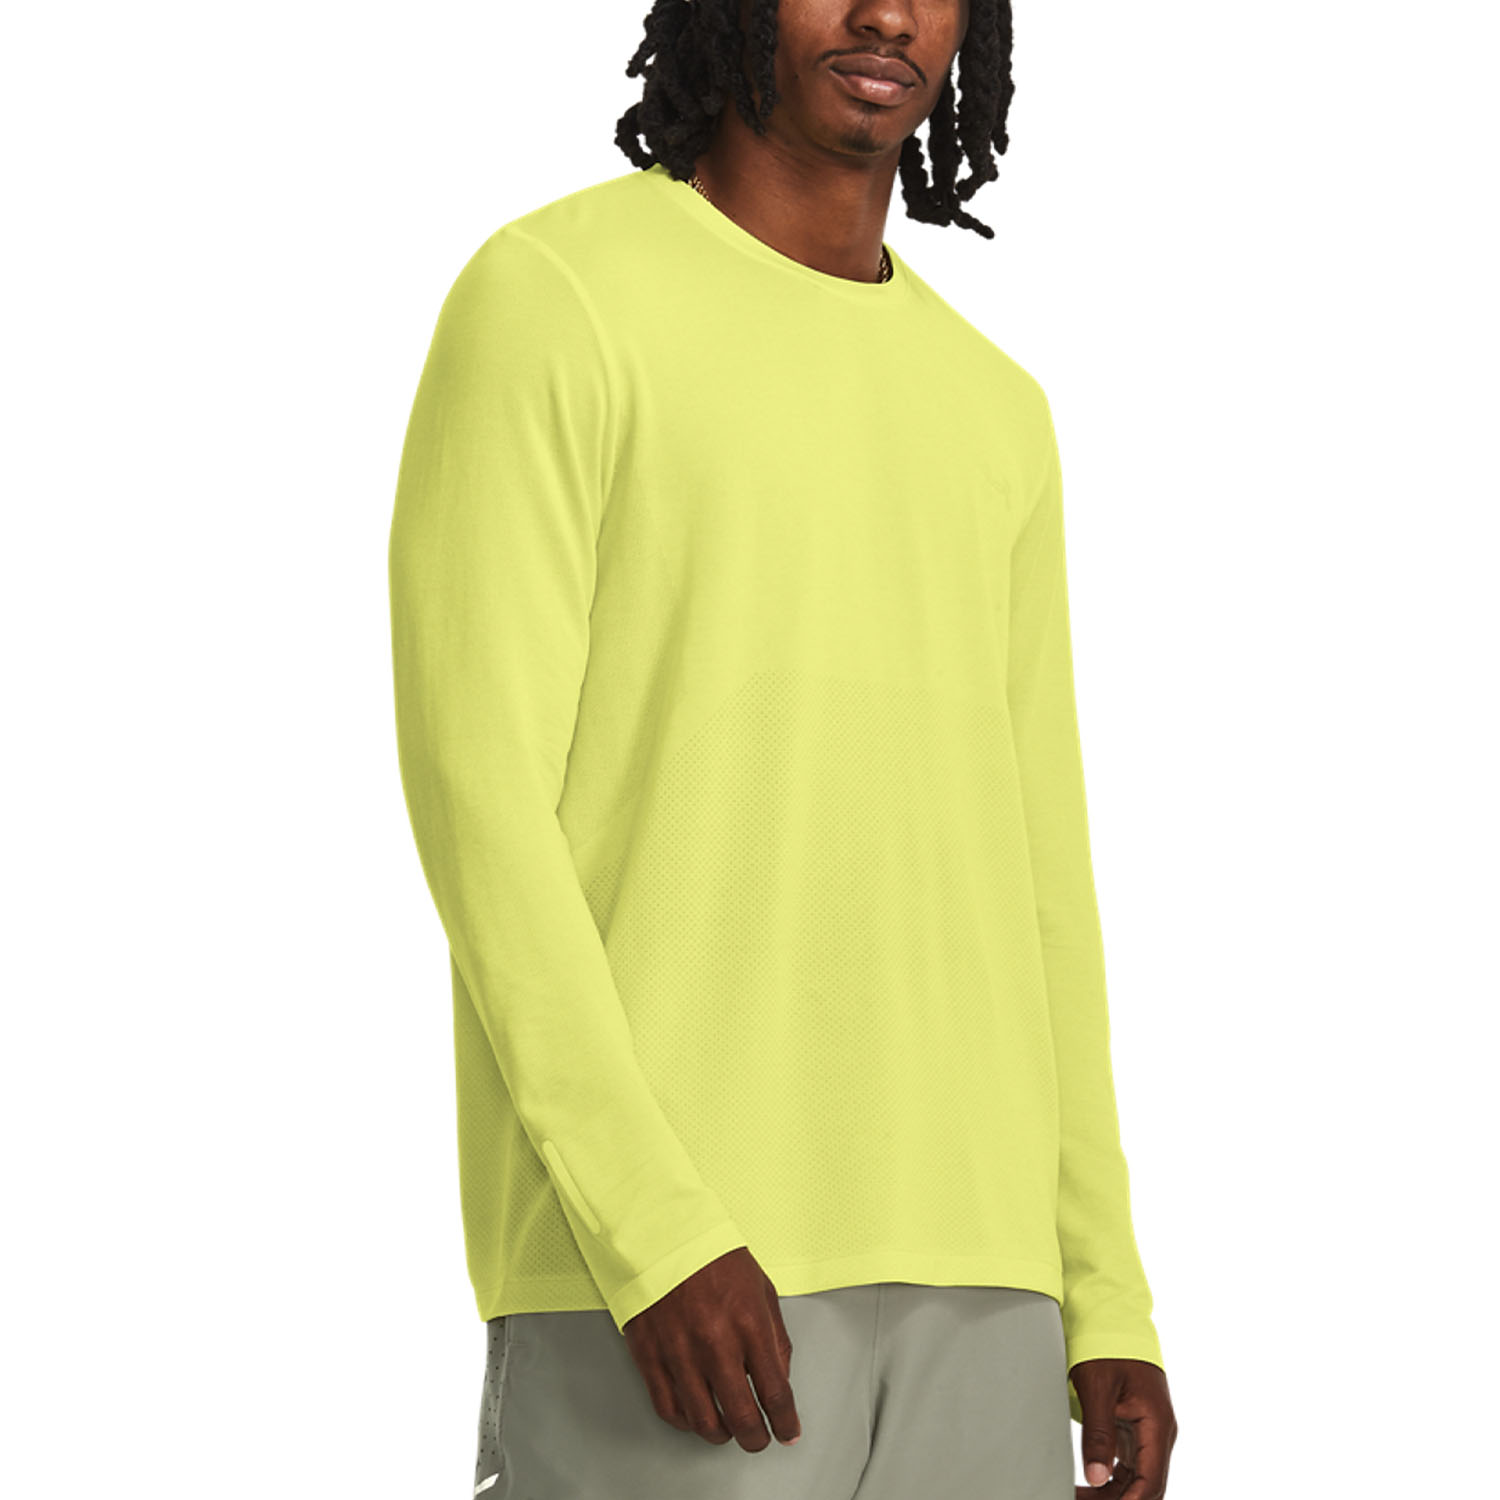 Under Armour Seamless Stride Shirt - Lime Yellow